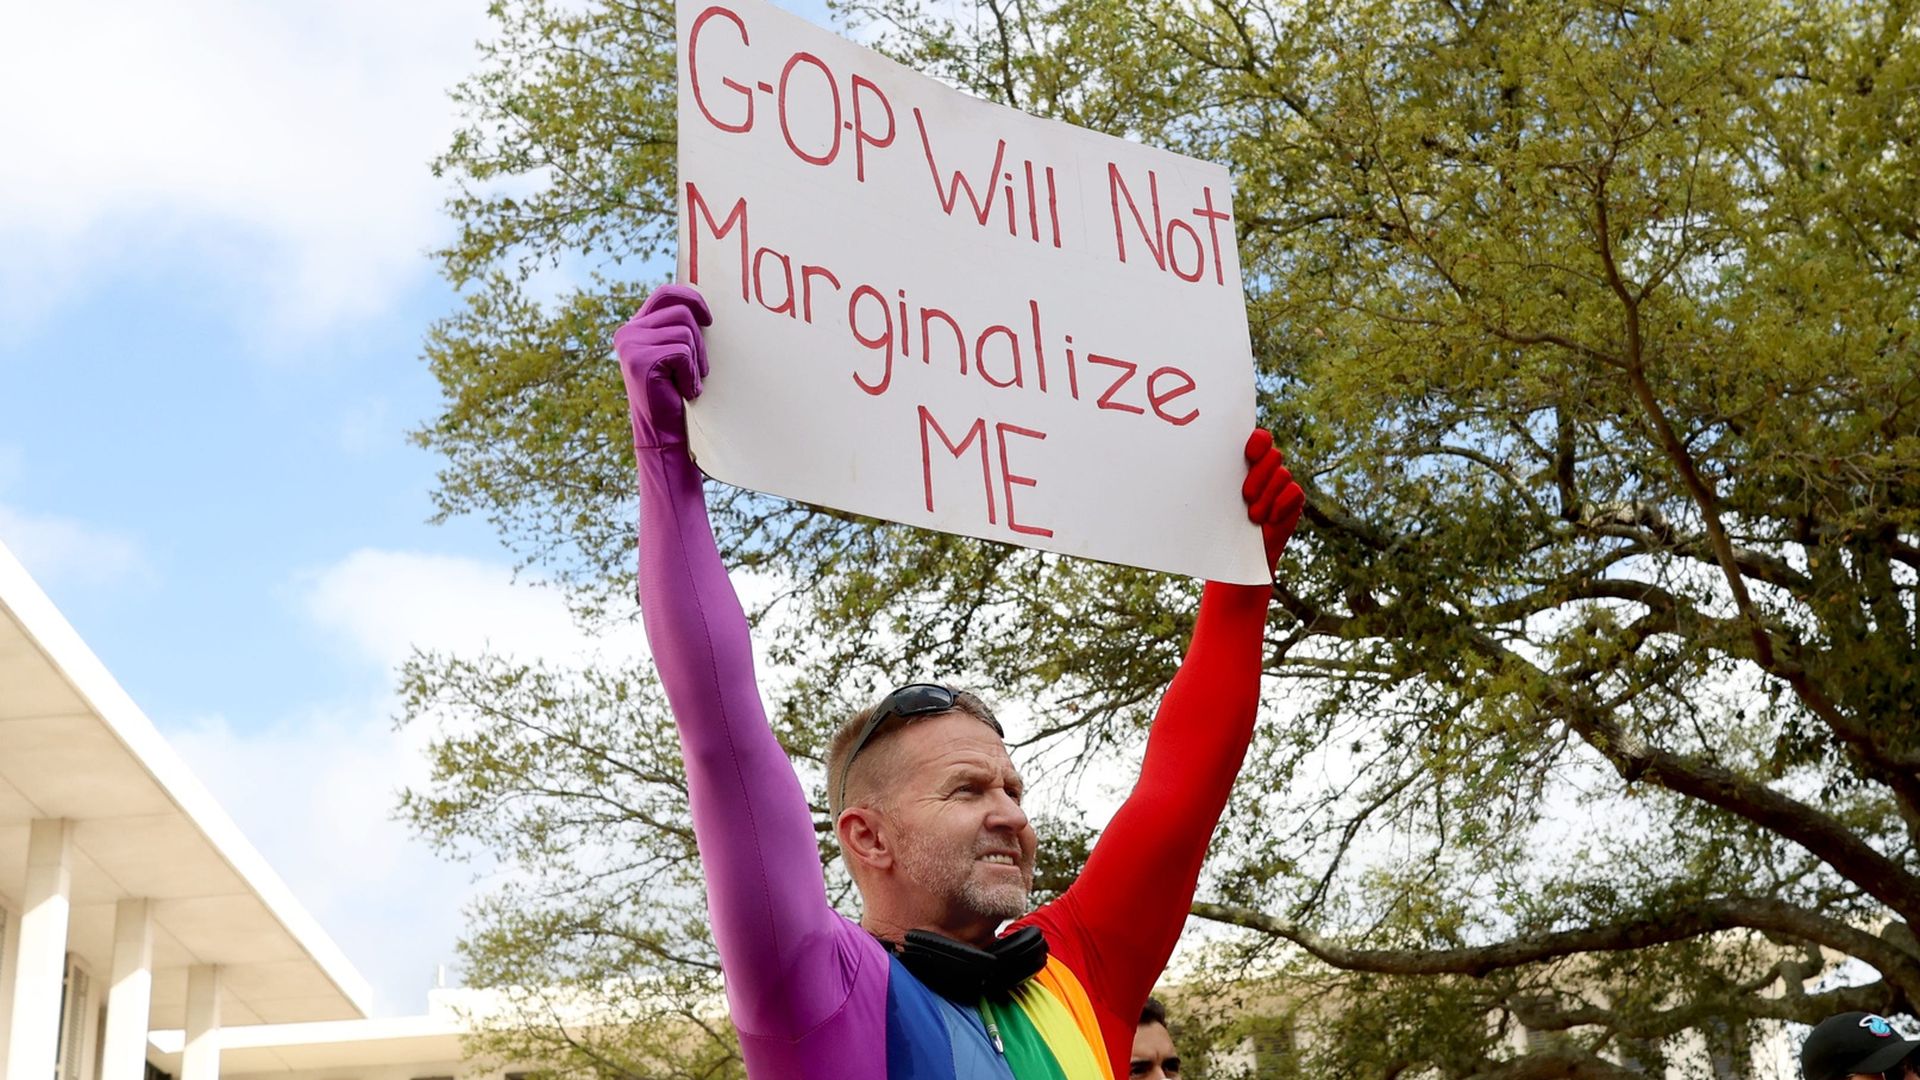 A person wearing a rainbow body suit holds up a sign saying "GOP Will not Marginalize ME"